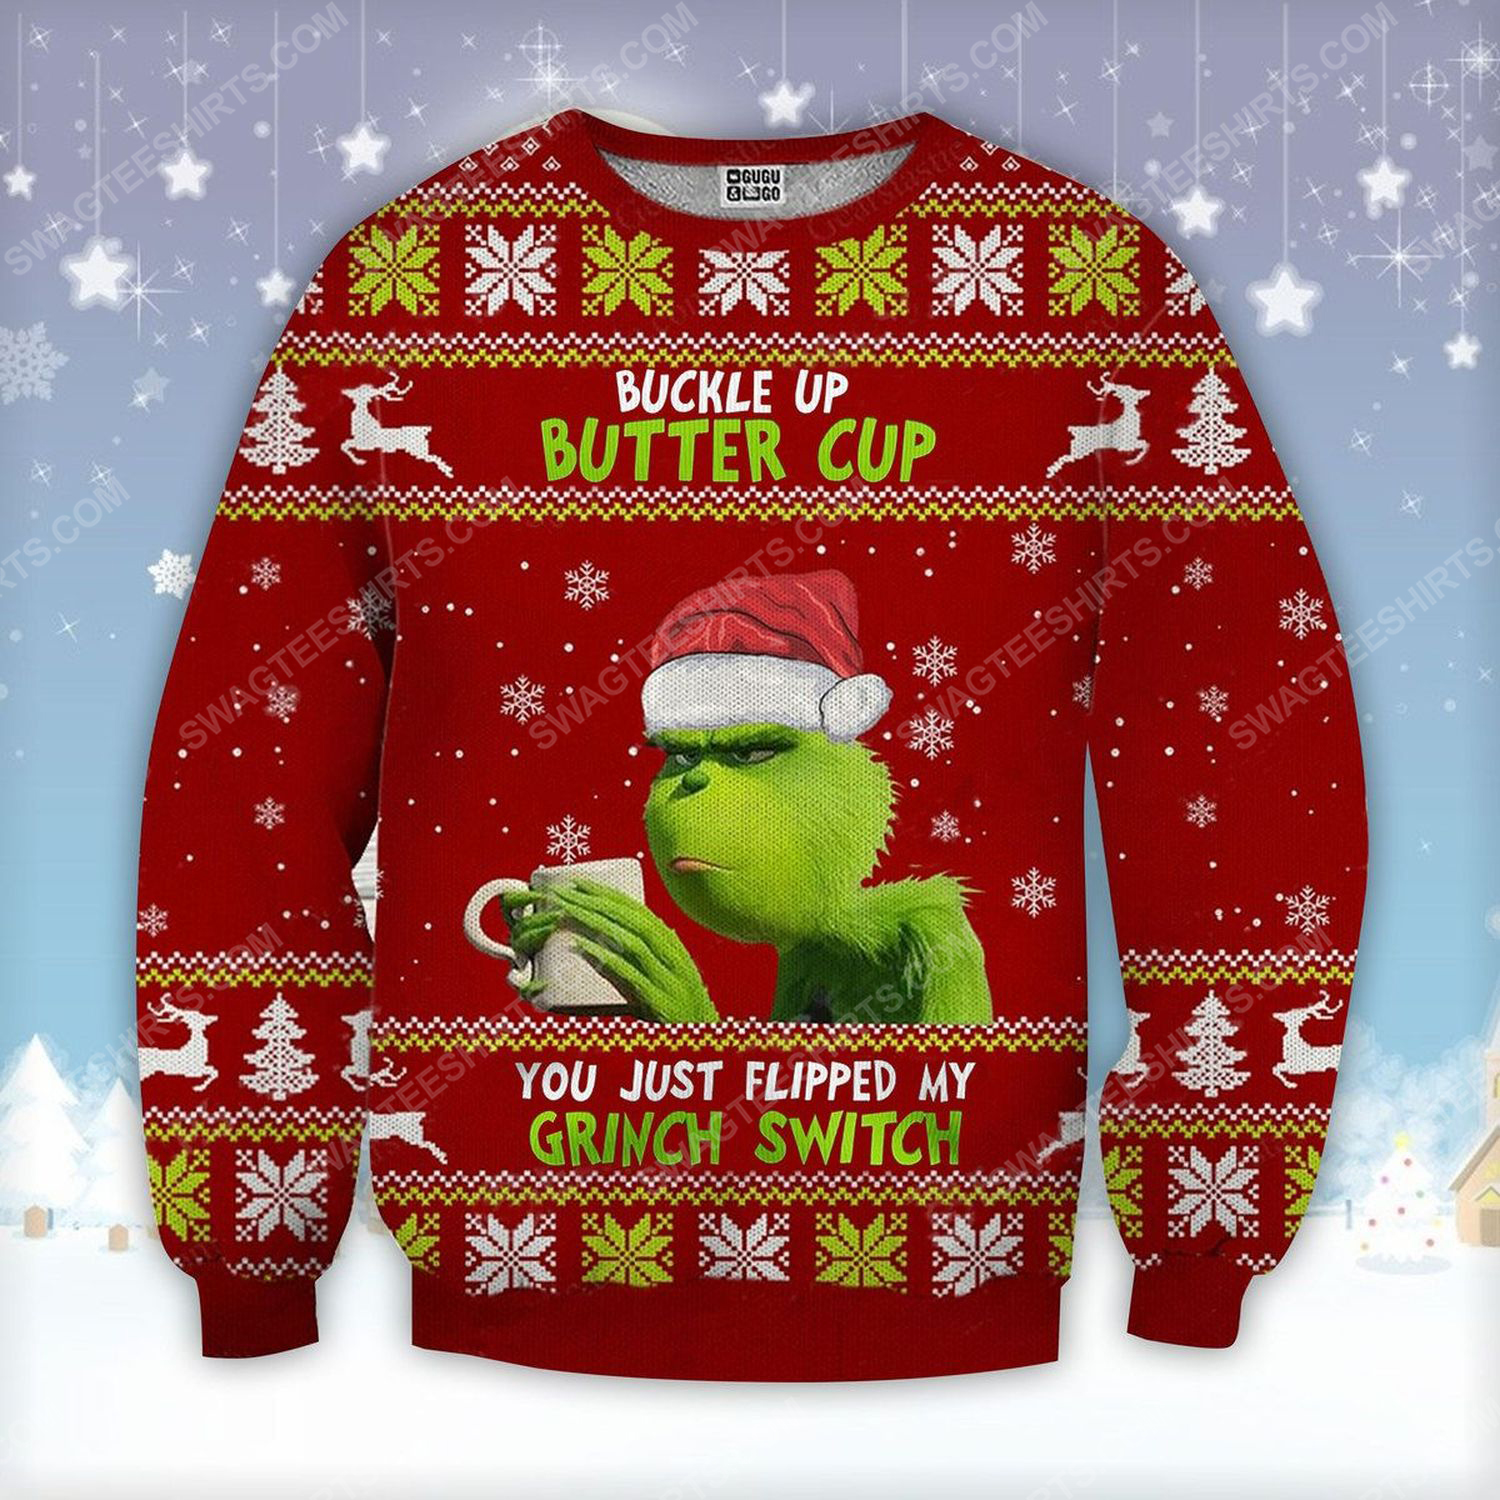 Buckle up buttercup you just flipped my grinch switch ugly christmas sweater - Copy (3)